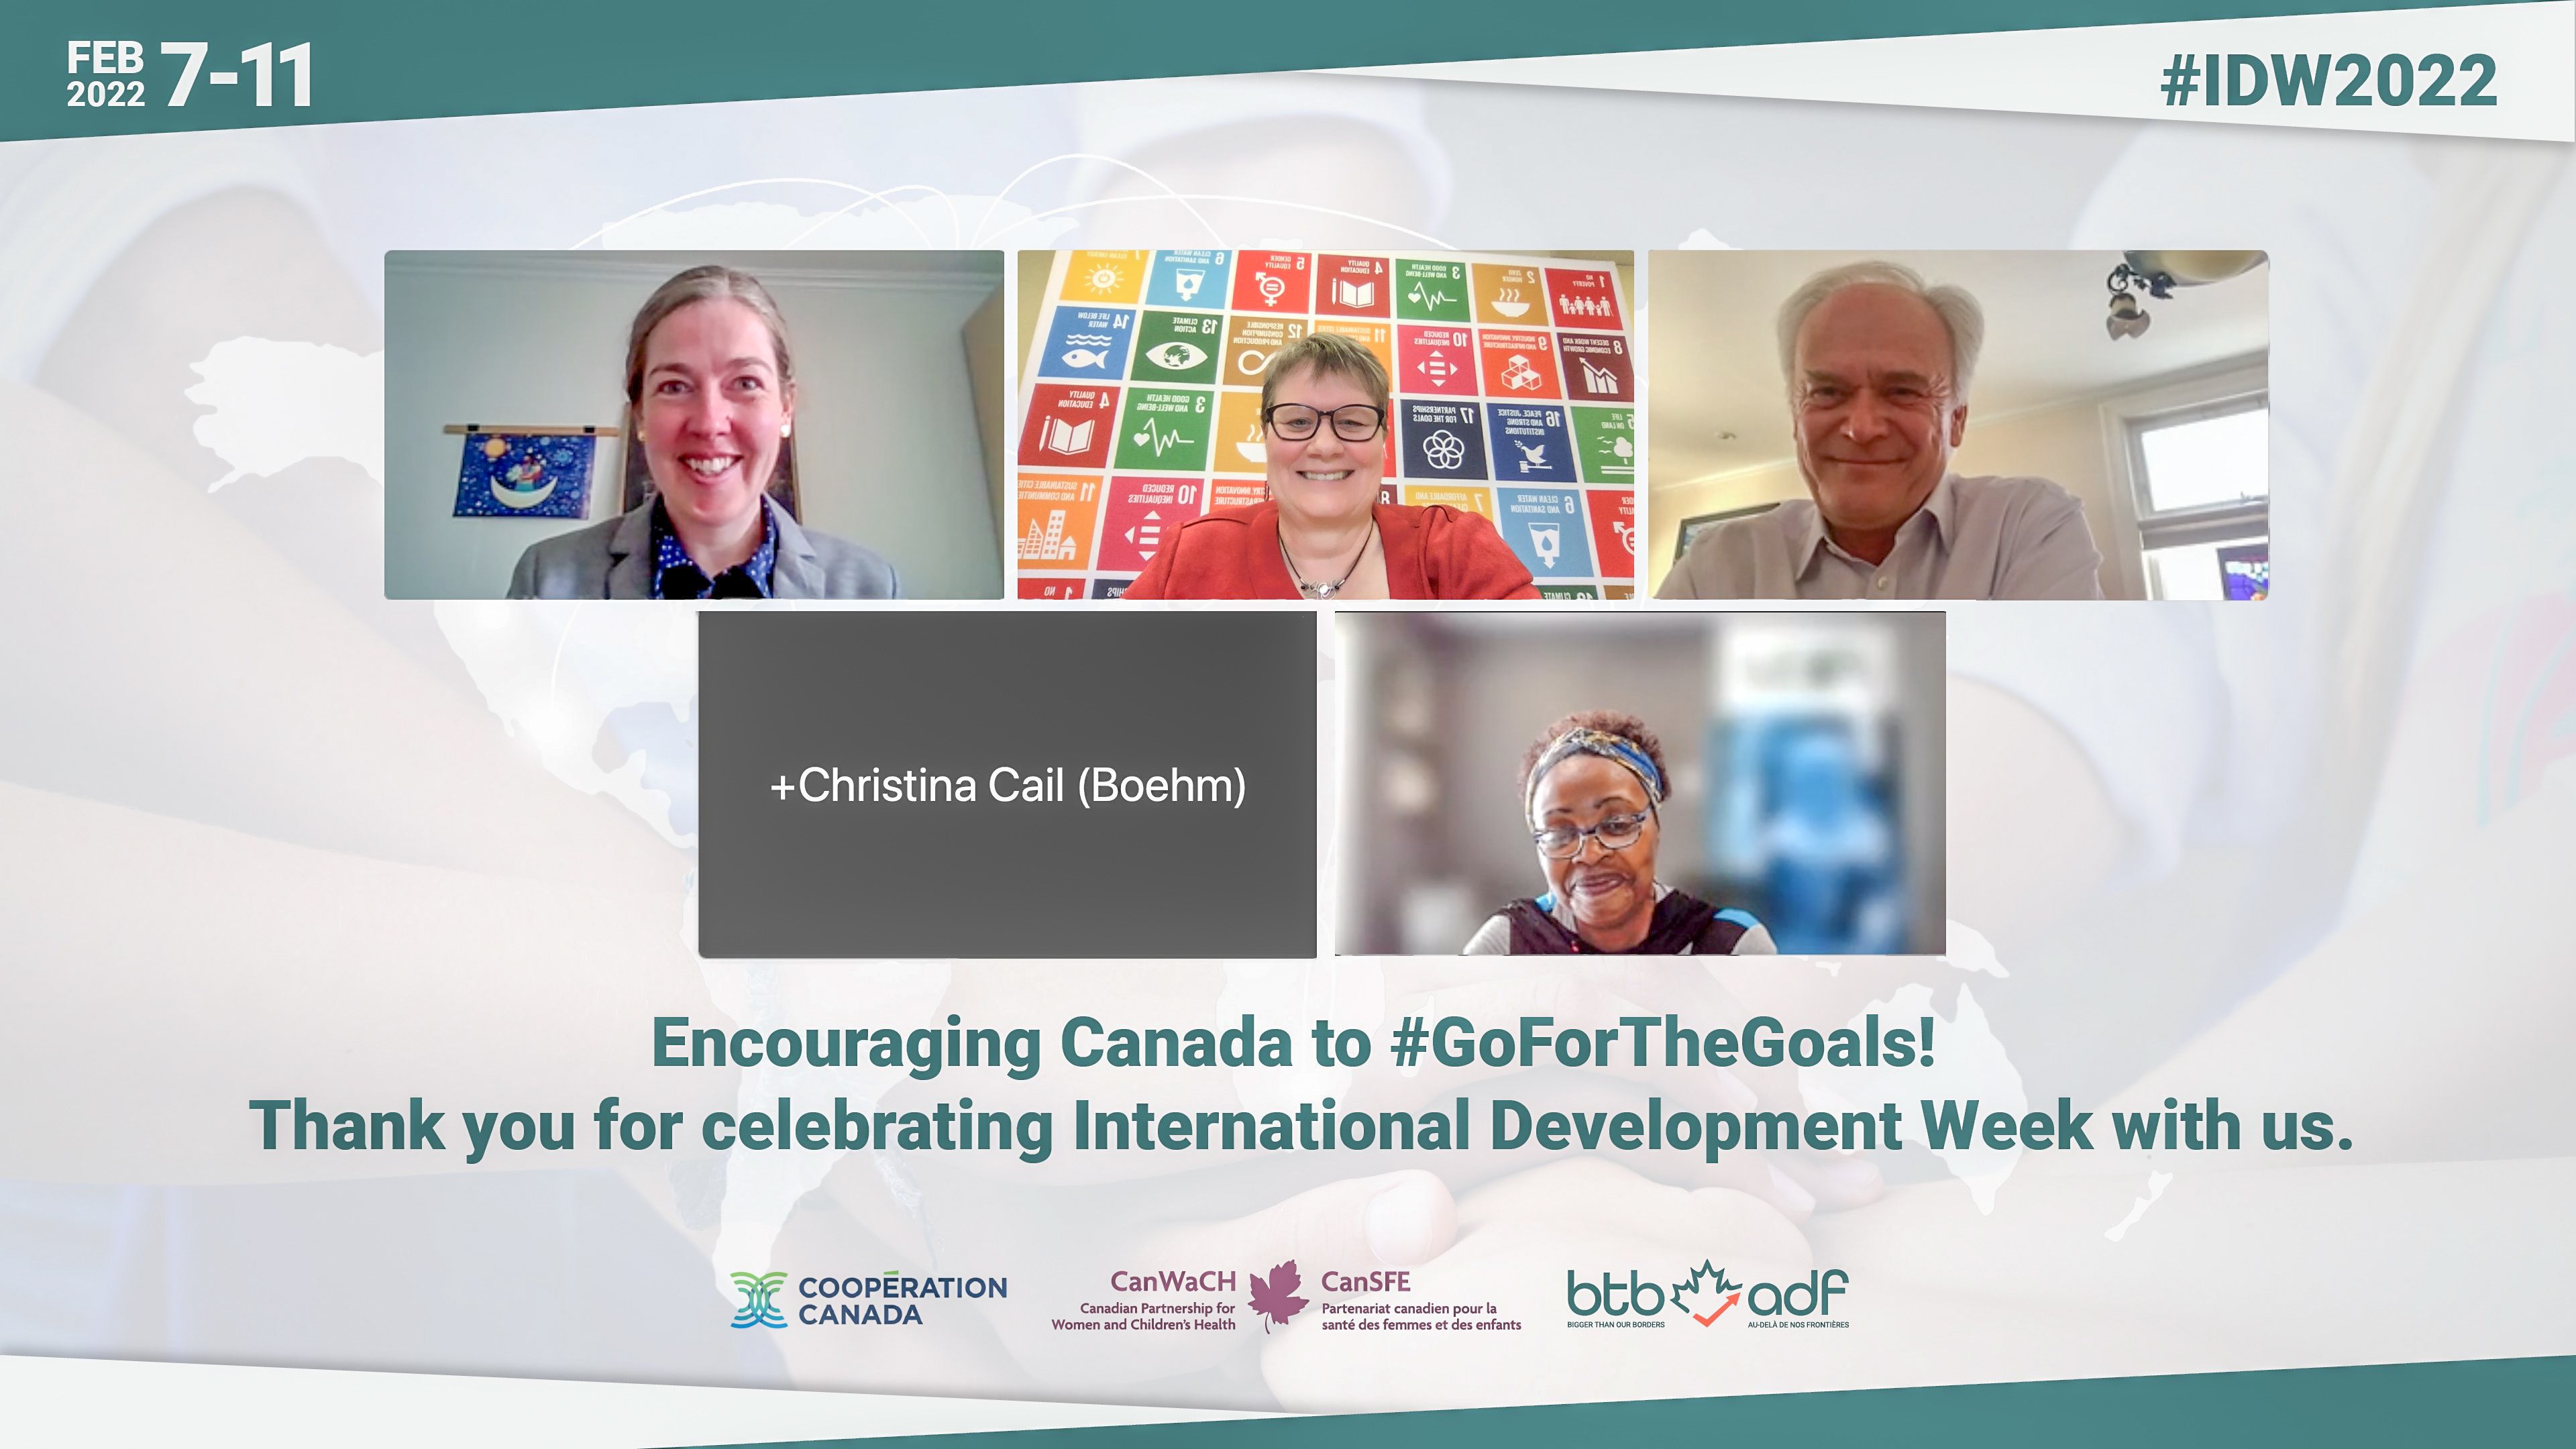 Monday, February 7, 2022 – During International Development Week, Senator Peter M. Boehm participates in a virtual panel discussing how Canada can be a global leader in tackling big issues like COVID-19, climate change and conflict.